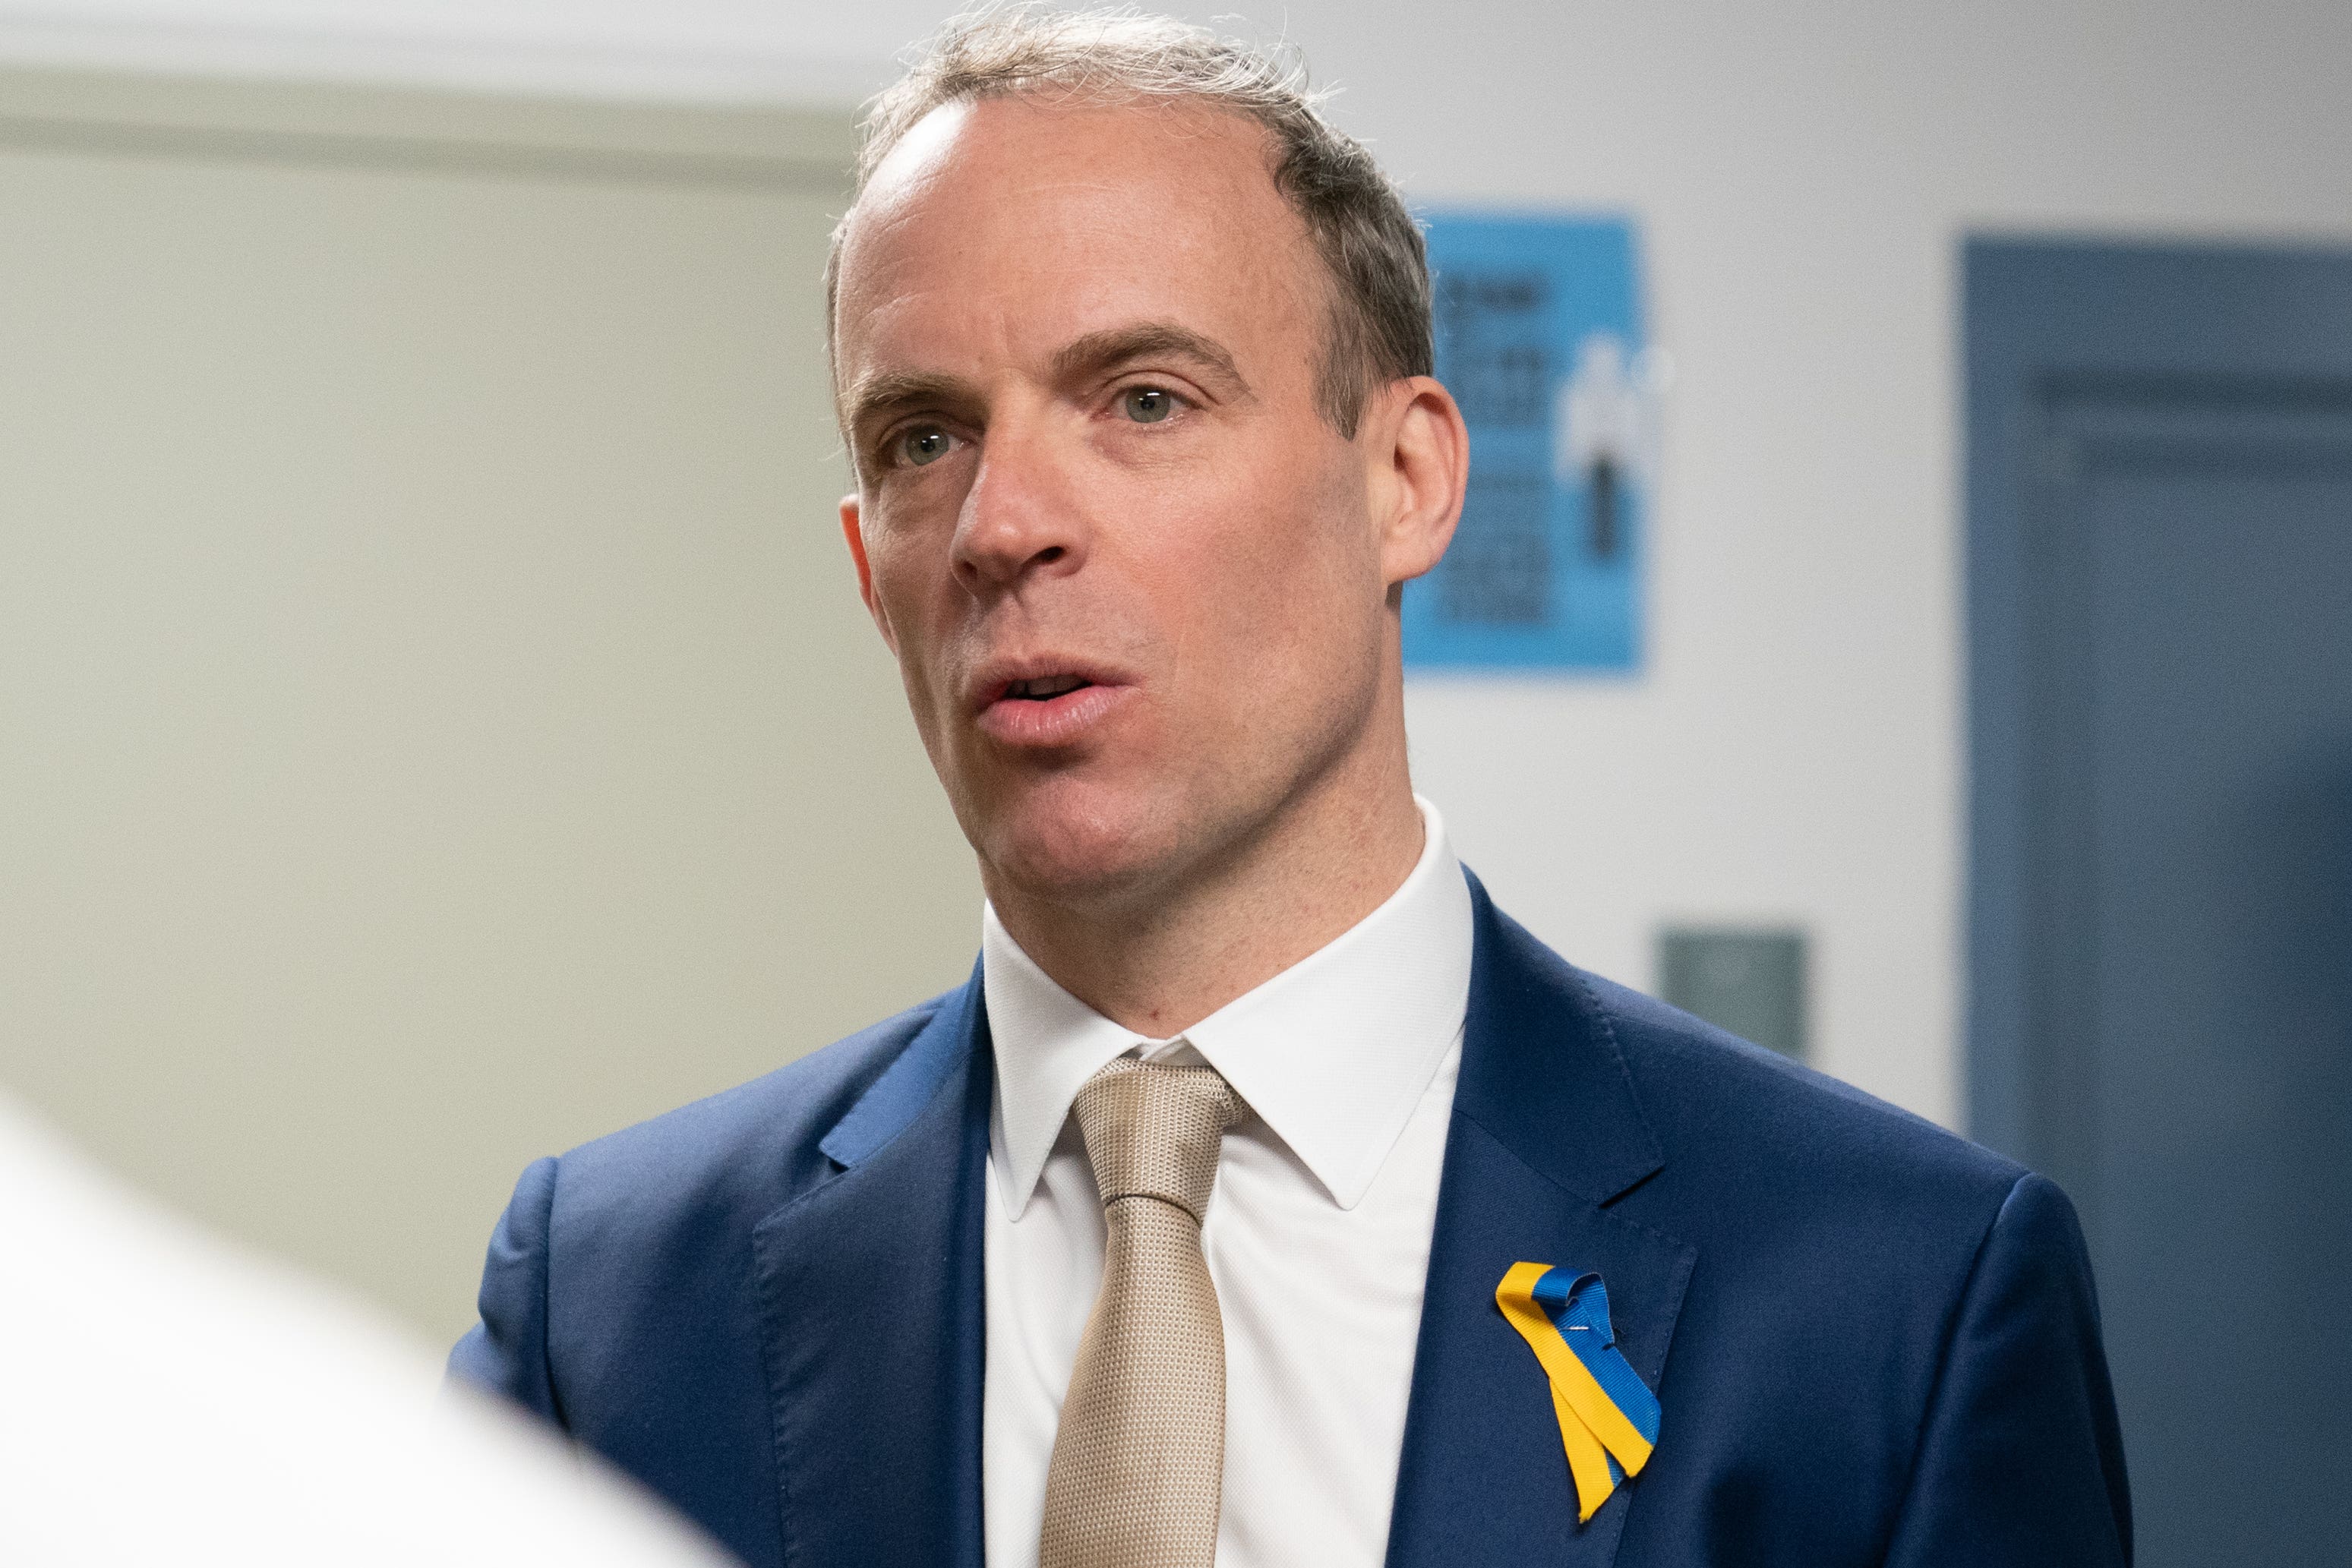 Deputy Prime Minister and Justice Secretary Dominic Raab during a visit to a prison earlier this month (Joe Giddens/PA)